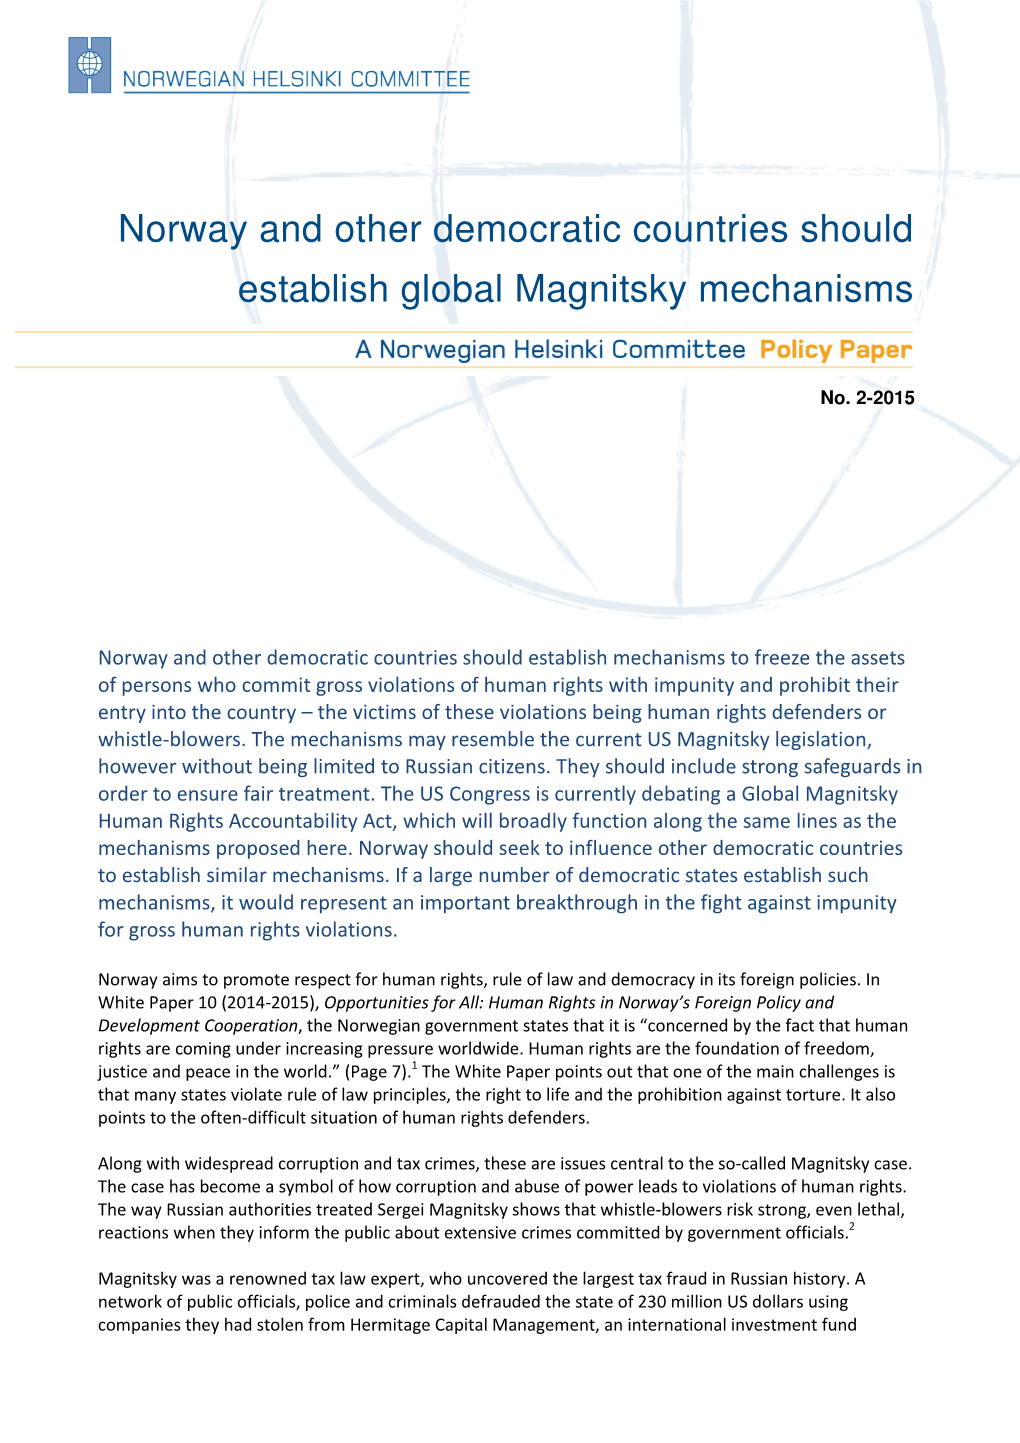 Norway and Other Democratic Countries Should Establish Global Magnitsky Mechanisms